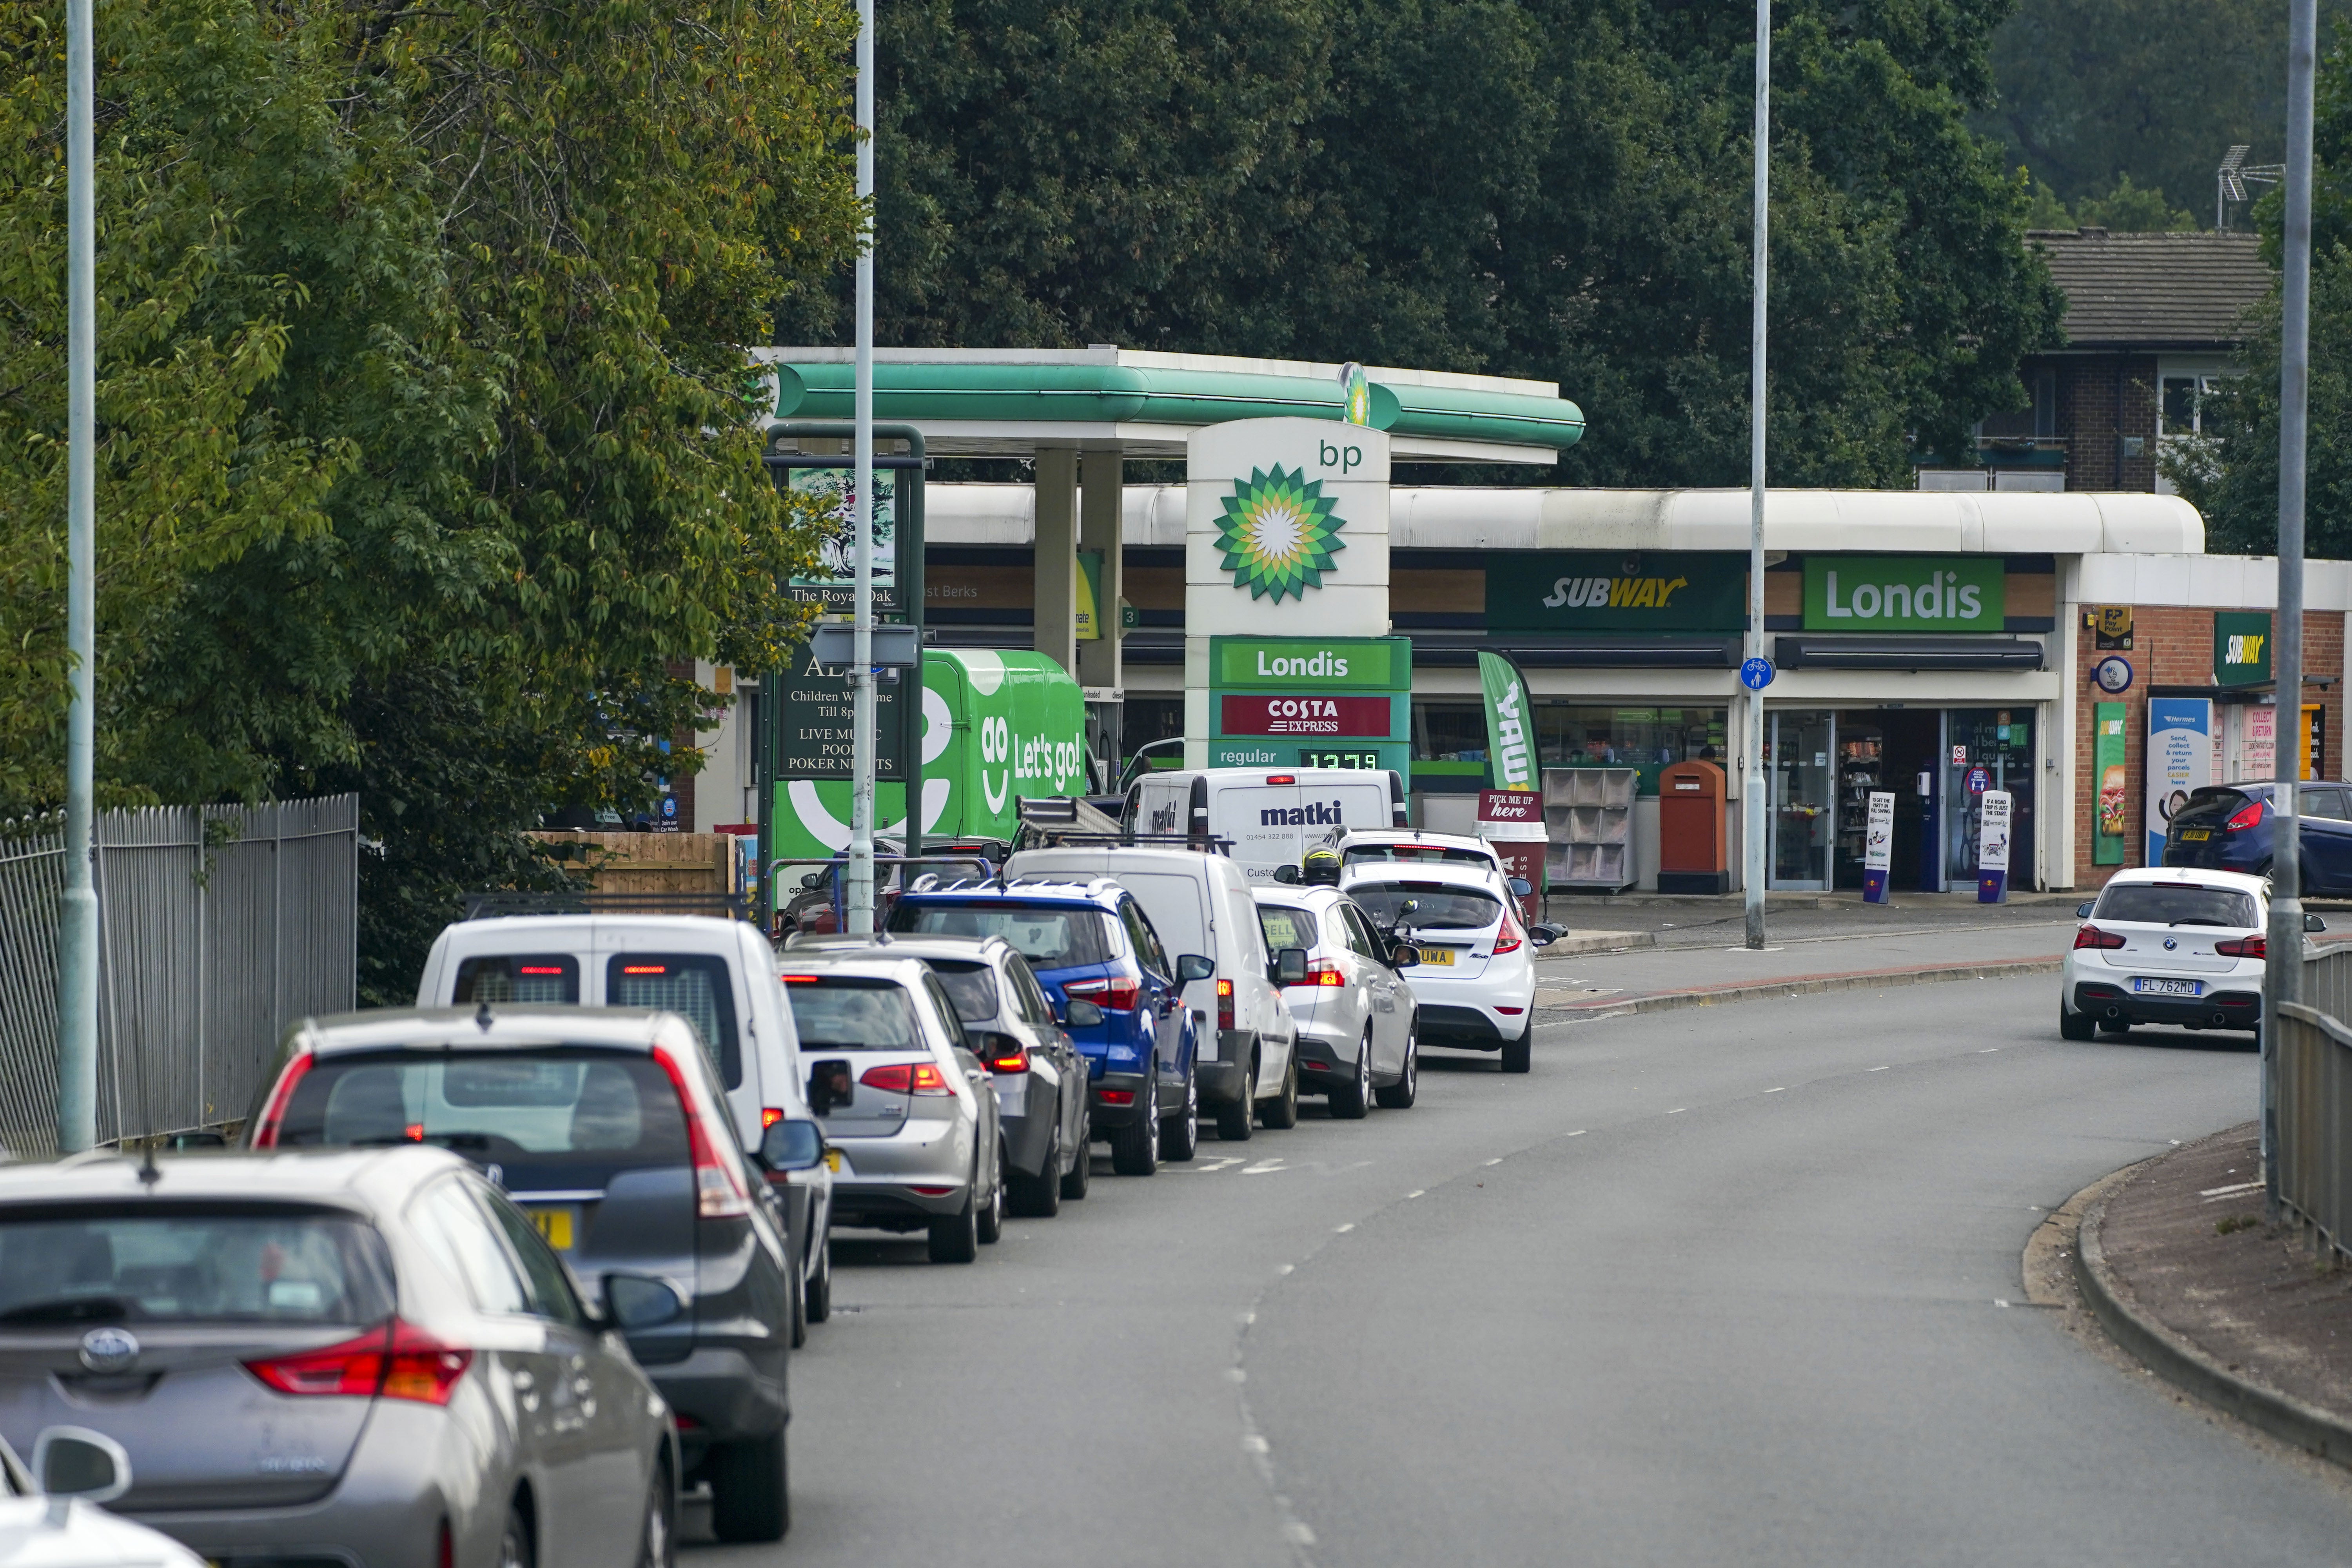 Cars queue for fuel at a BP petrol station in Bracknell, Berkshire